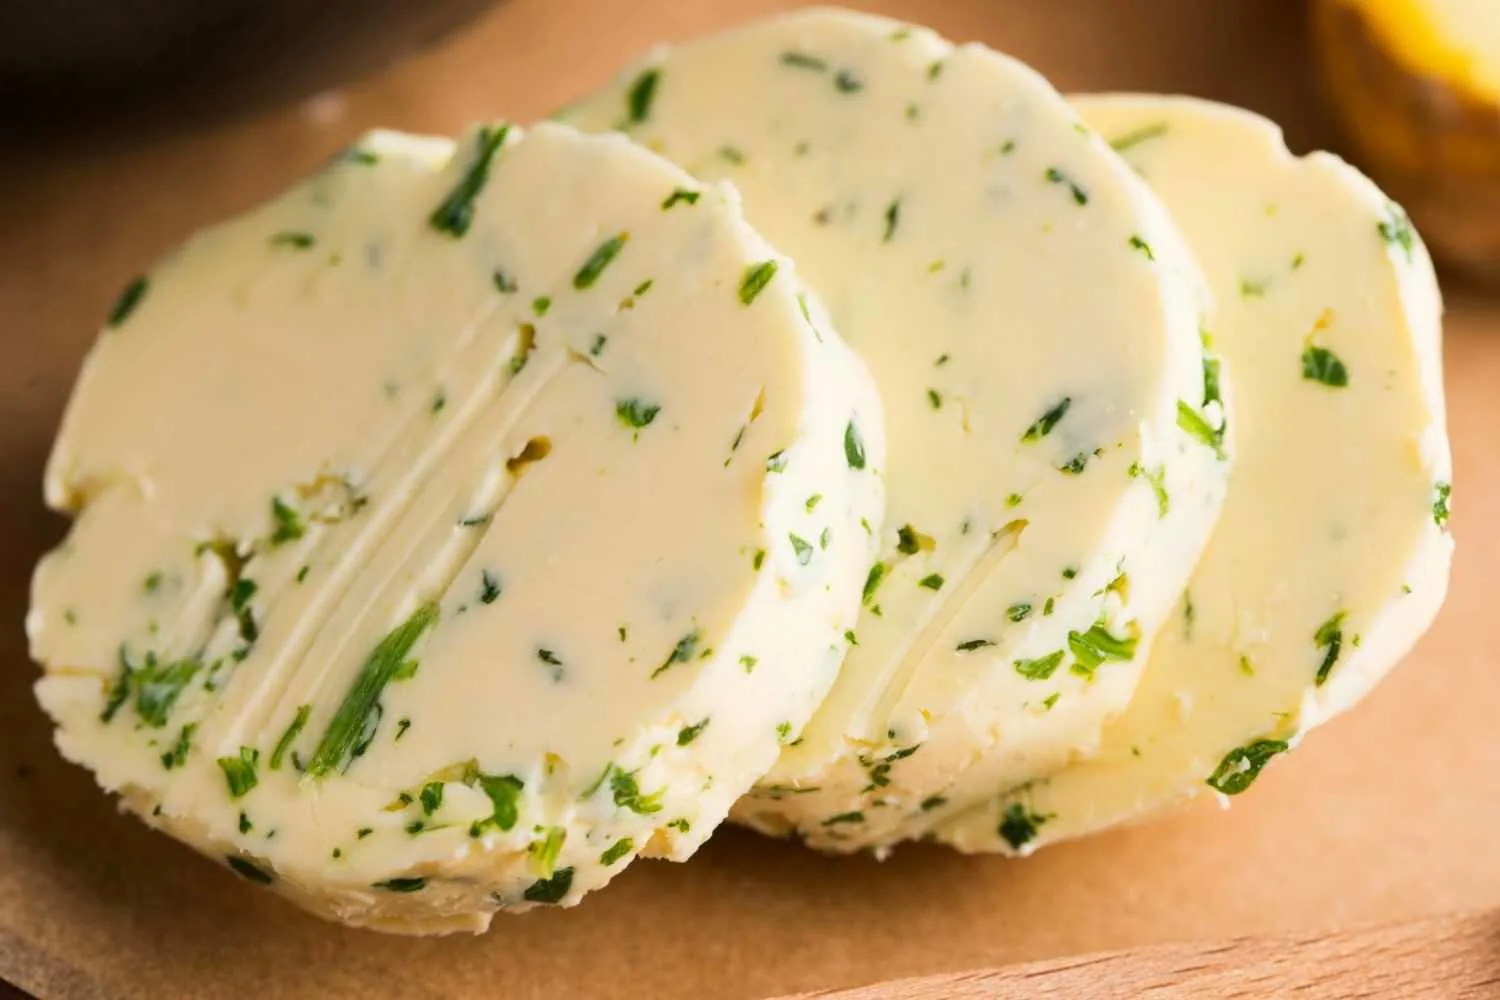 Sliced Compound Butter